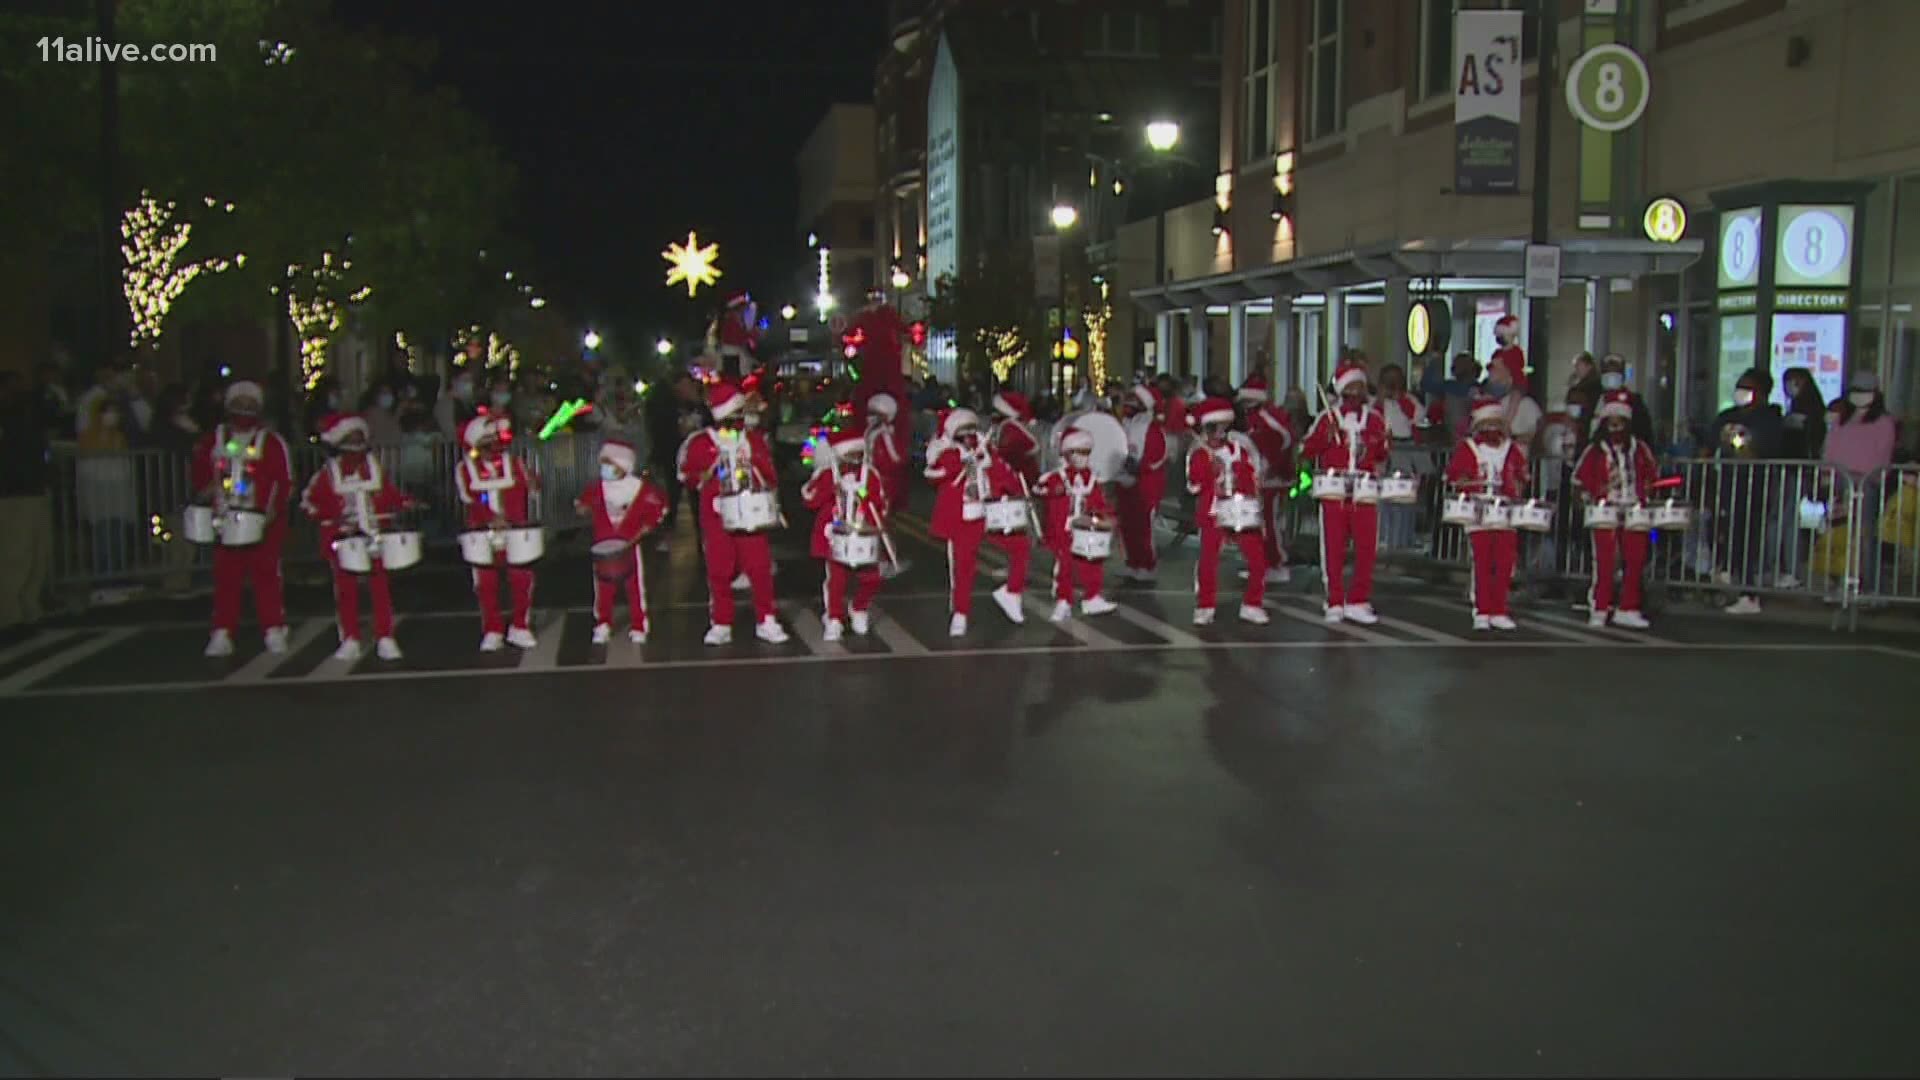 Join Christine Pullara and Cara Kneer at the Parade of Lights at Atlantic Station for a festive celebration with special guests!